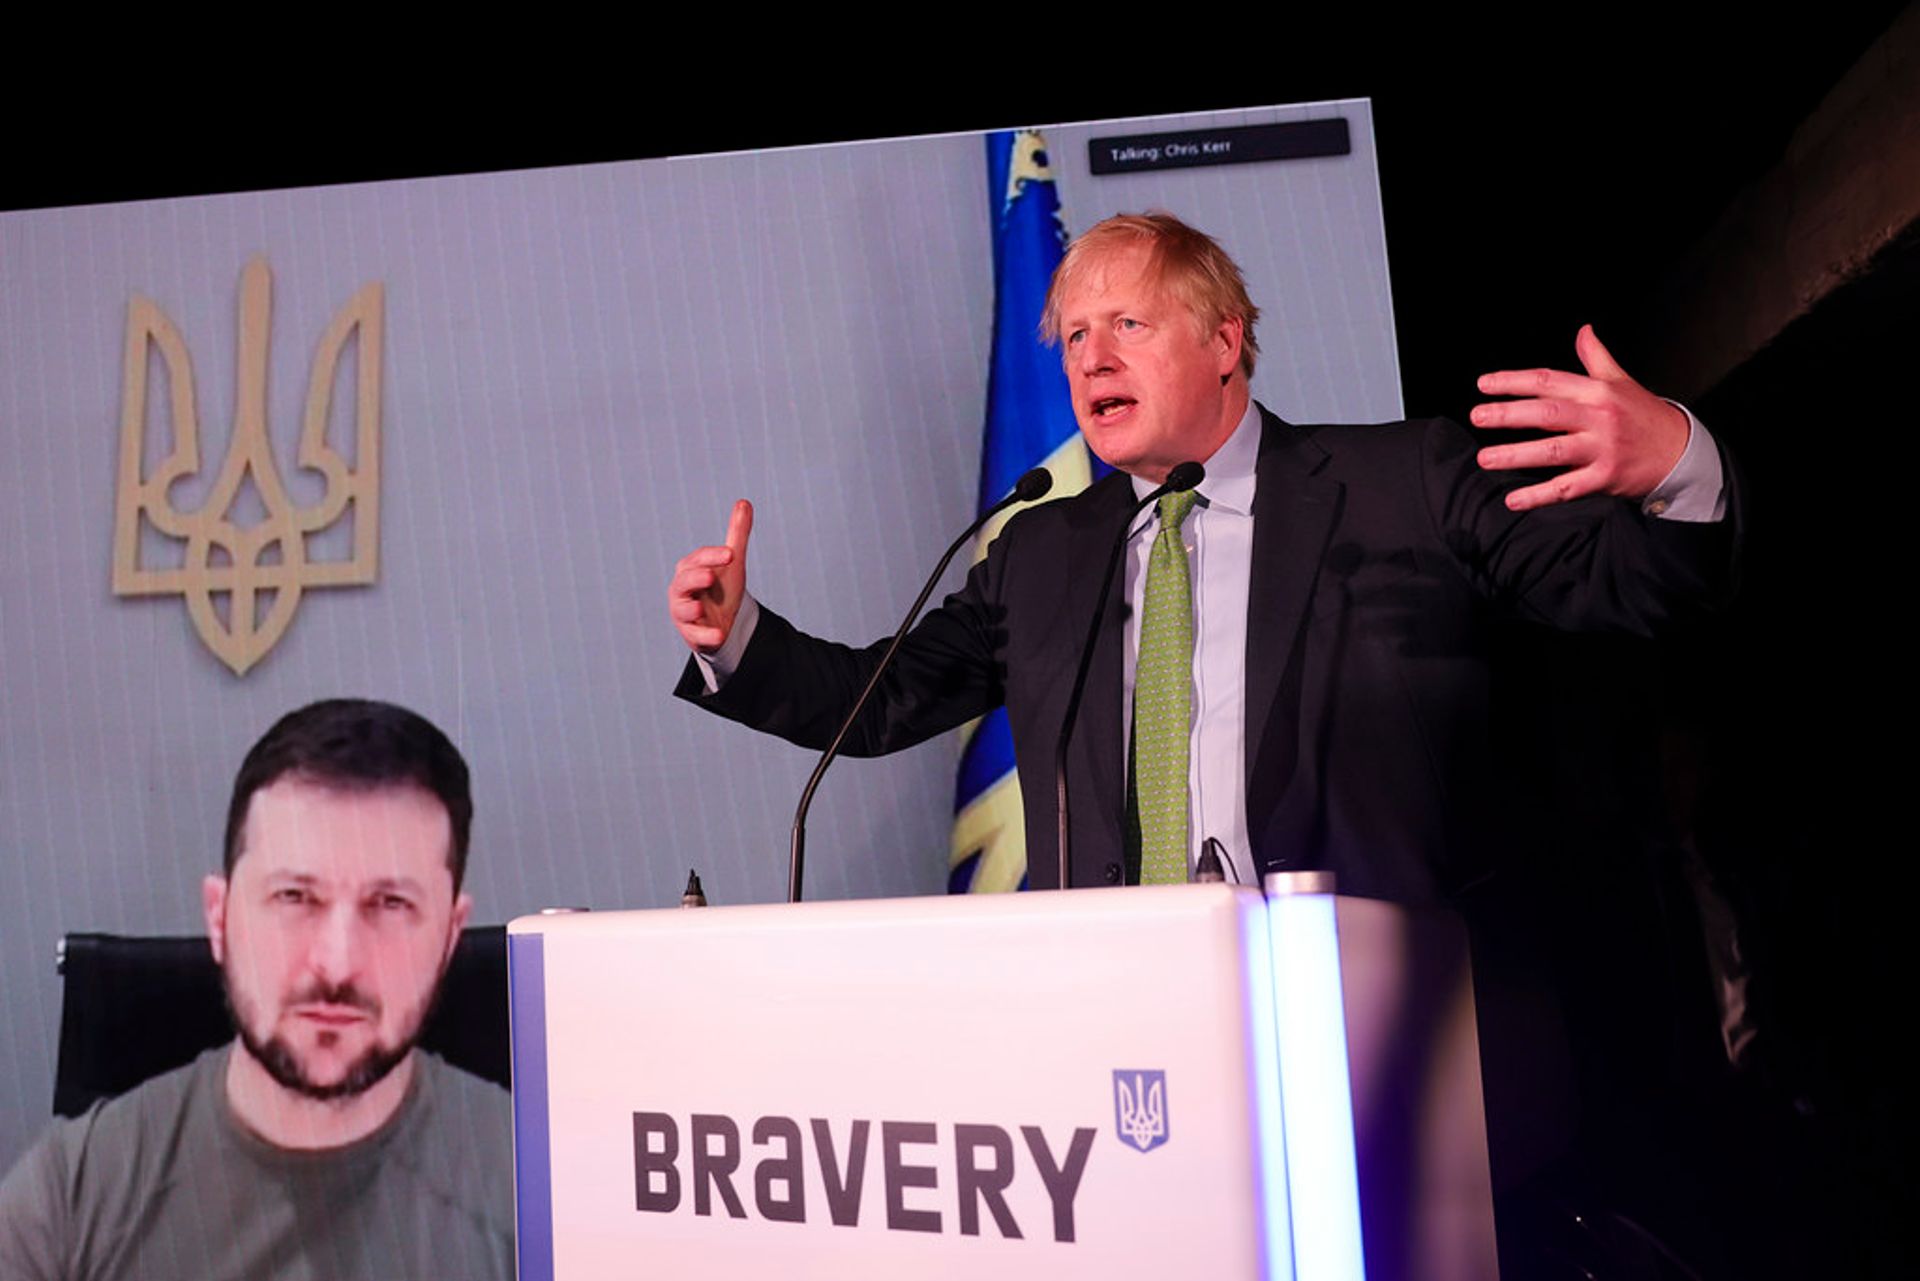 Prime Minister Boris Johnson gave a speech at the Brave Ukraine event while President Volodymyr Zelensky appeared by video screen Photo: Simon Dawson / No 10 Downing Street